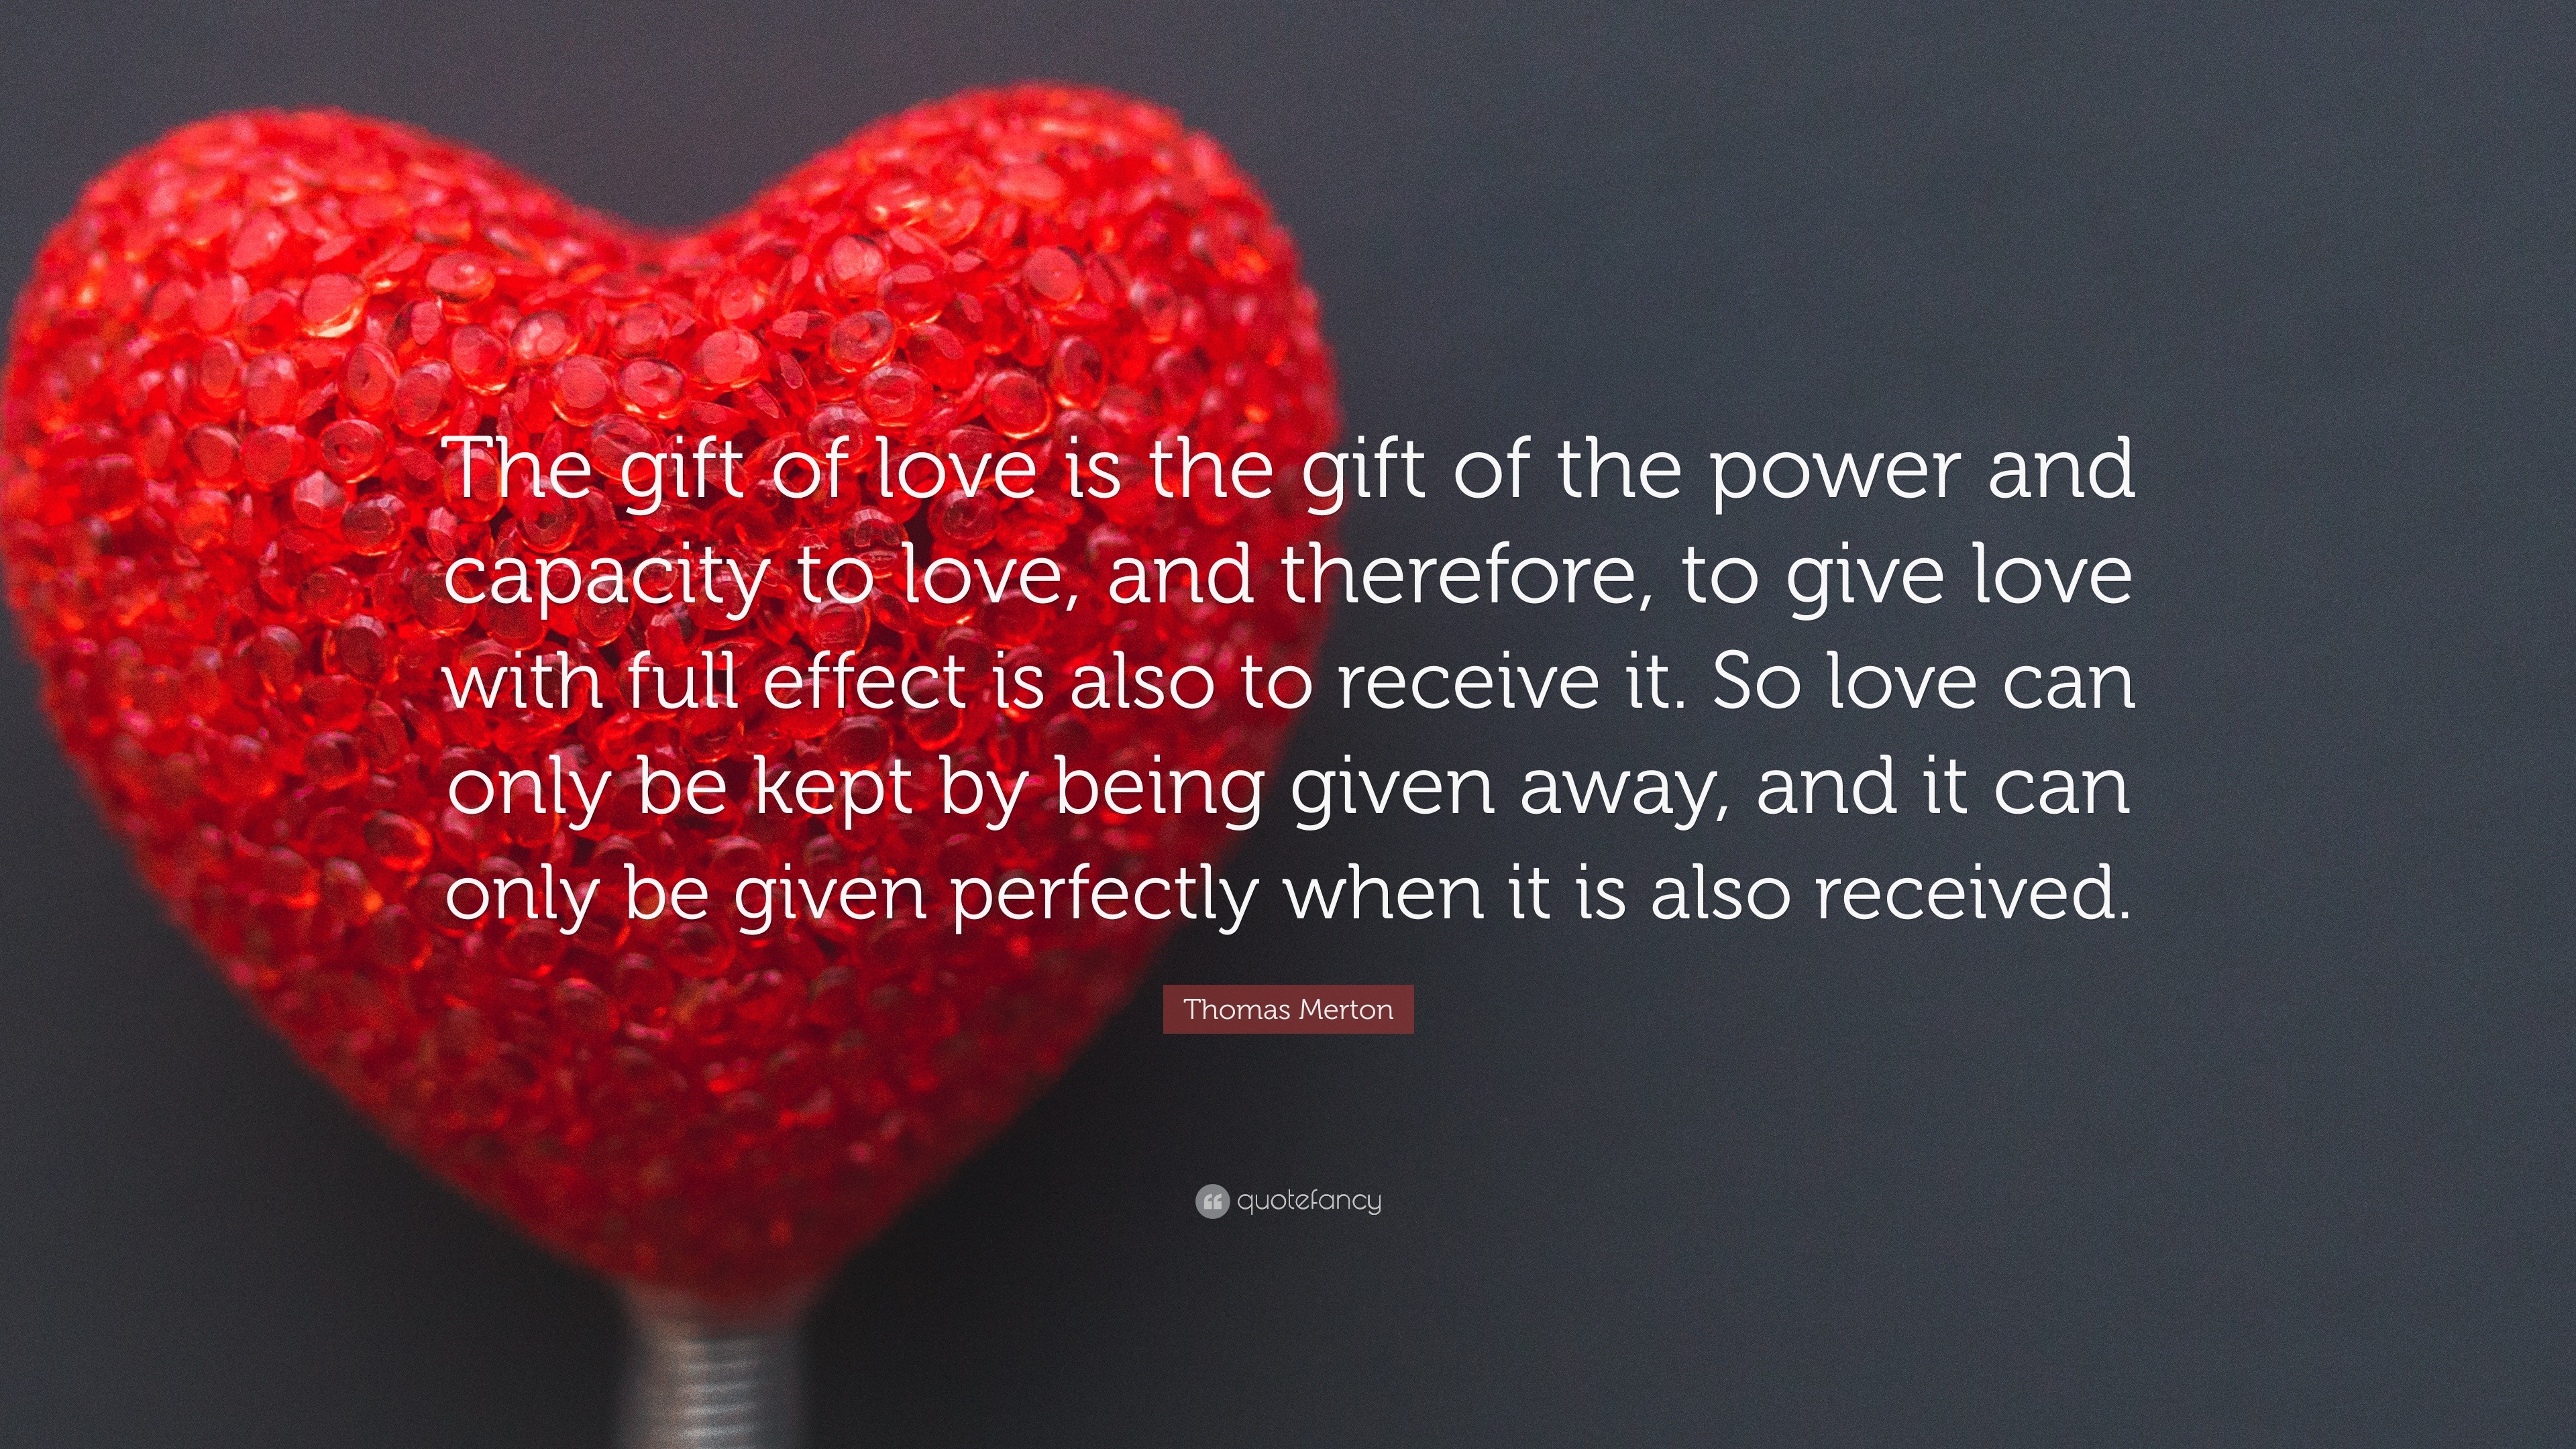 Thomas Merton Quote: “The gift of love is the gift of the power